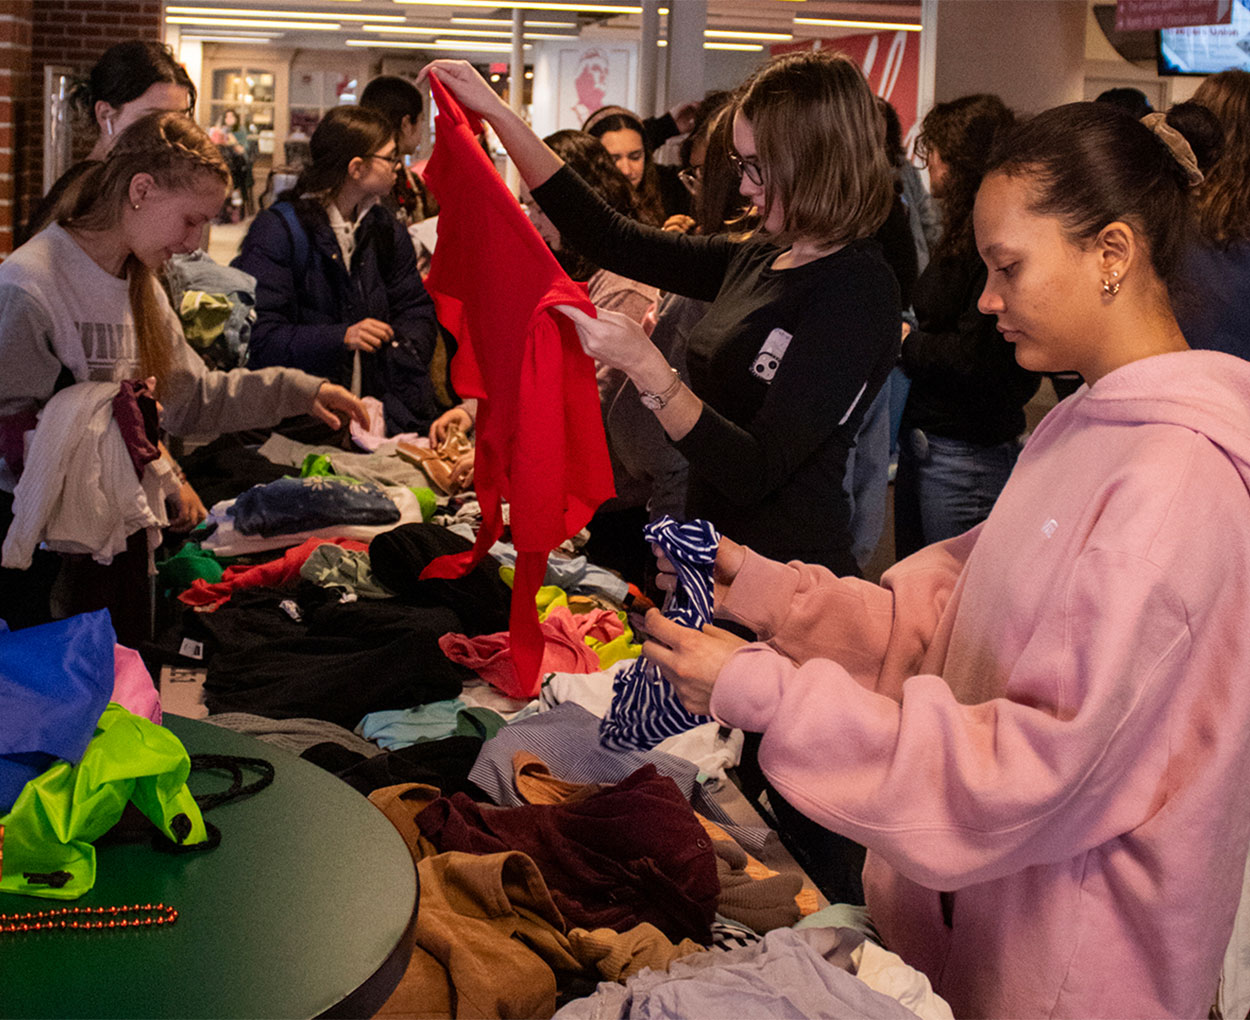 Students gather around and sift through tables piled with clothing.